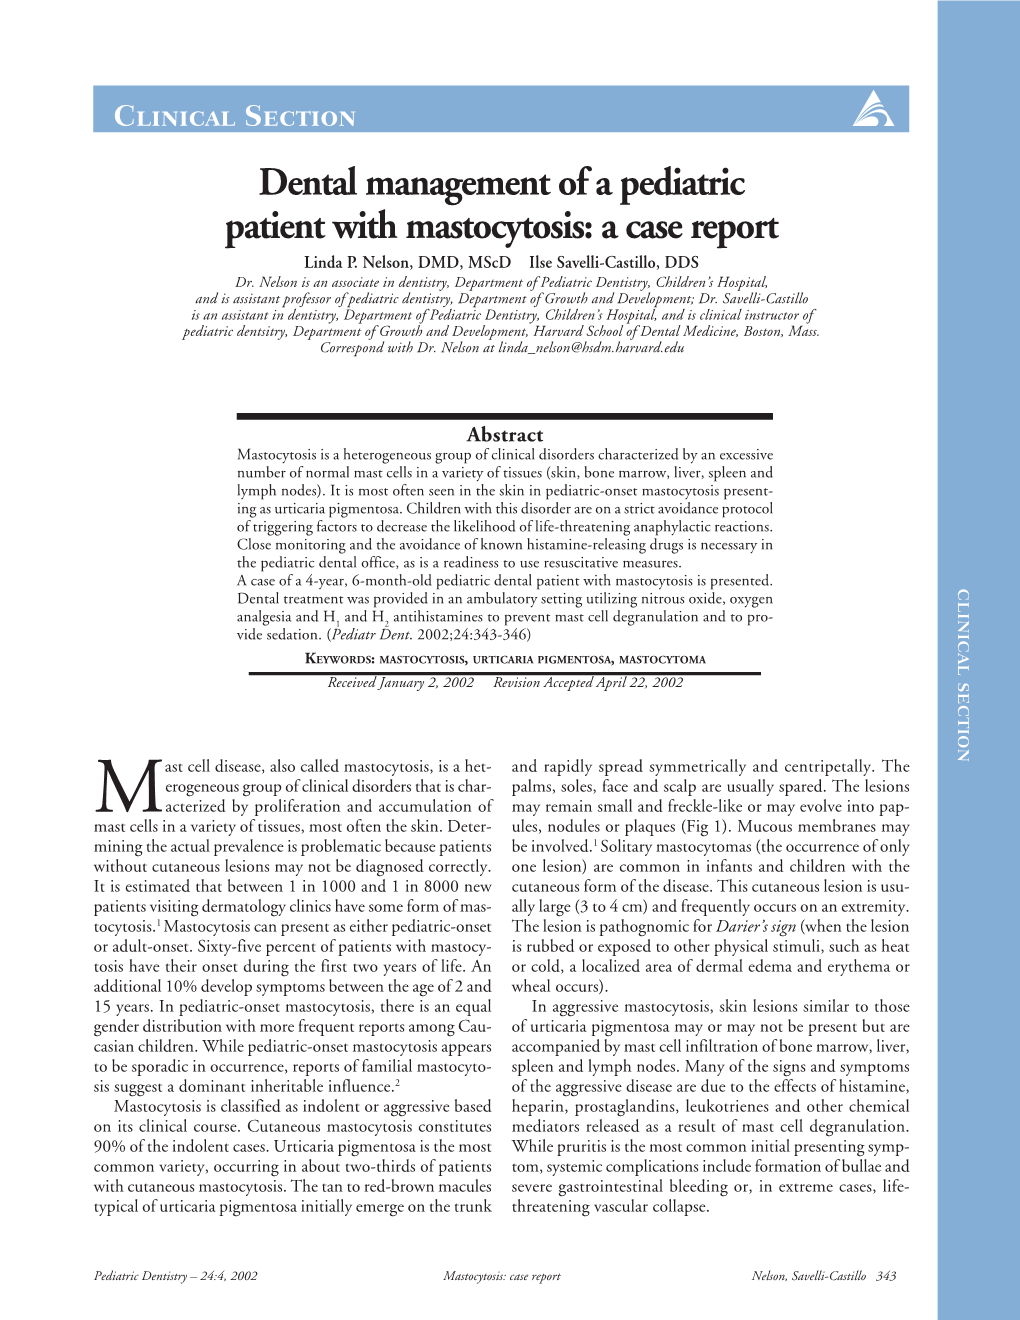 Dental Management of a Pediatric Patient with Mastocytosis: a Case Report Linda P